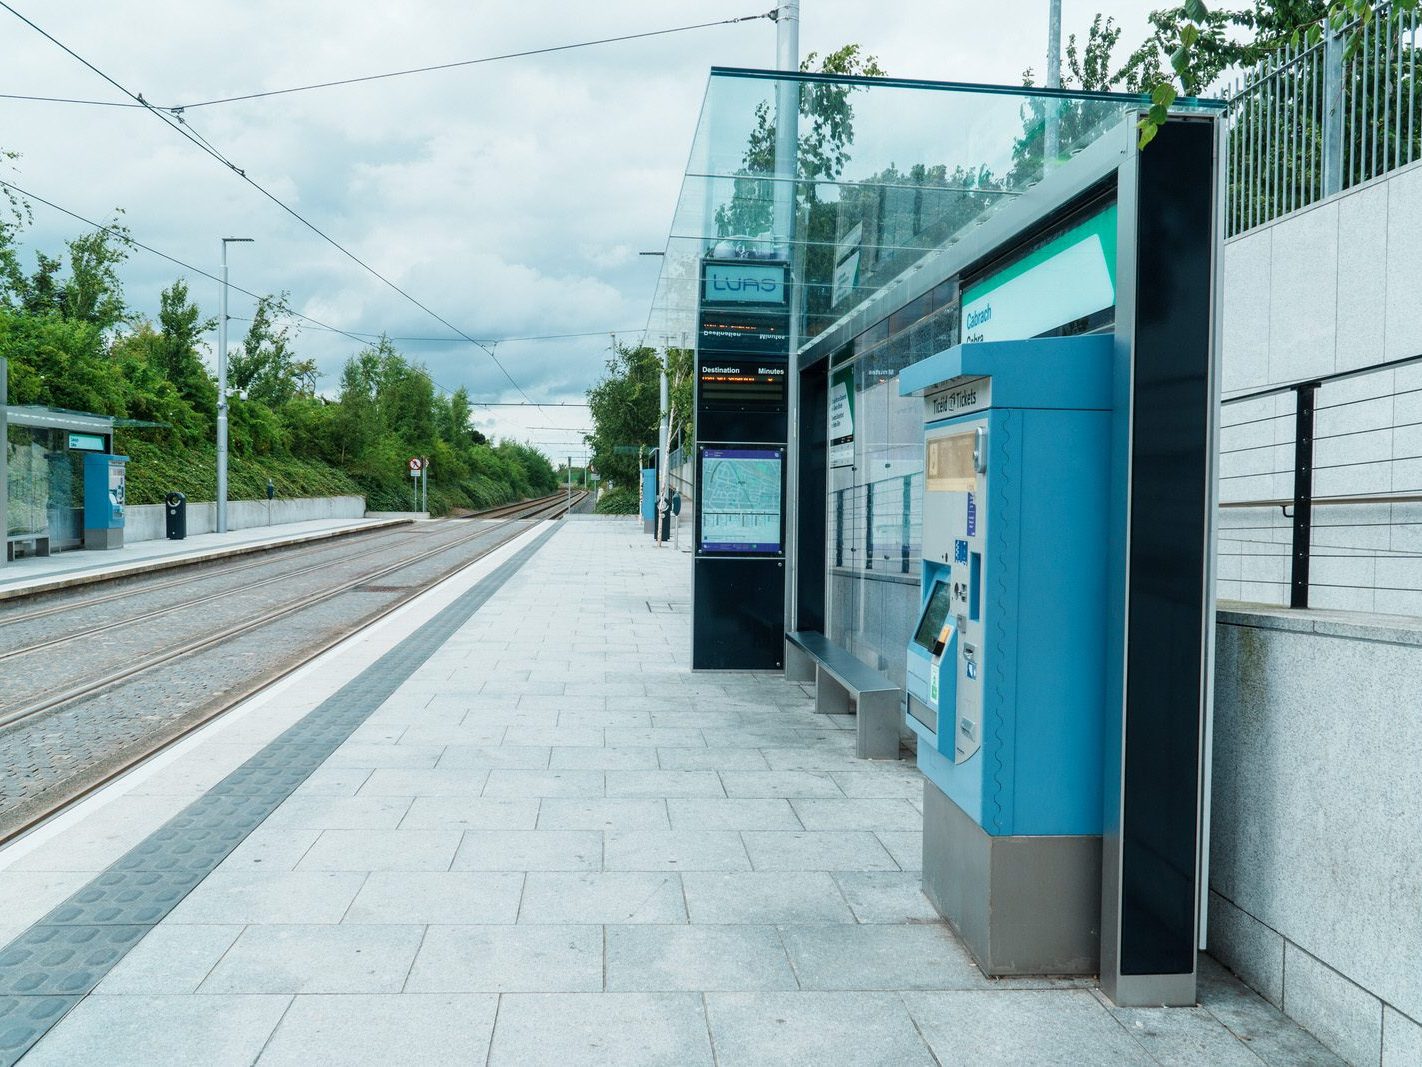 CABRA LUAS TRAM STOP ON CONNAUGHT STREET [GOOGLE BARD INCORRECTLY CLAIMED THAT THERE IS A PUBLIC TOILET AND A TICKET OFFICE] 011